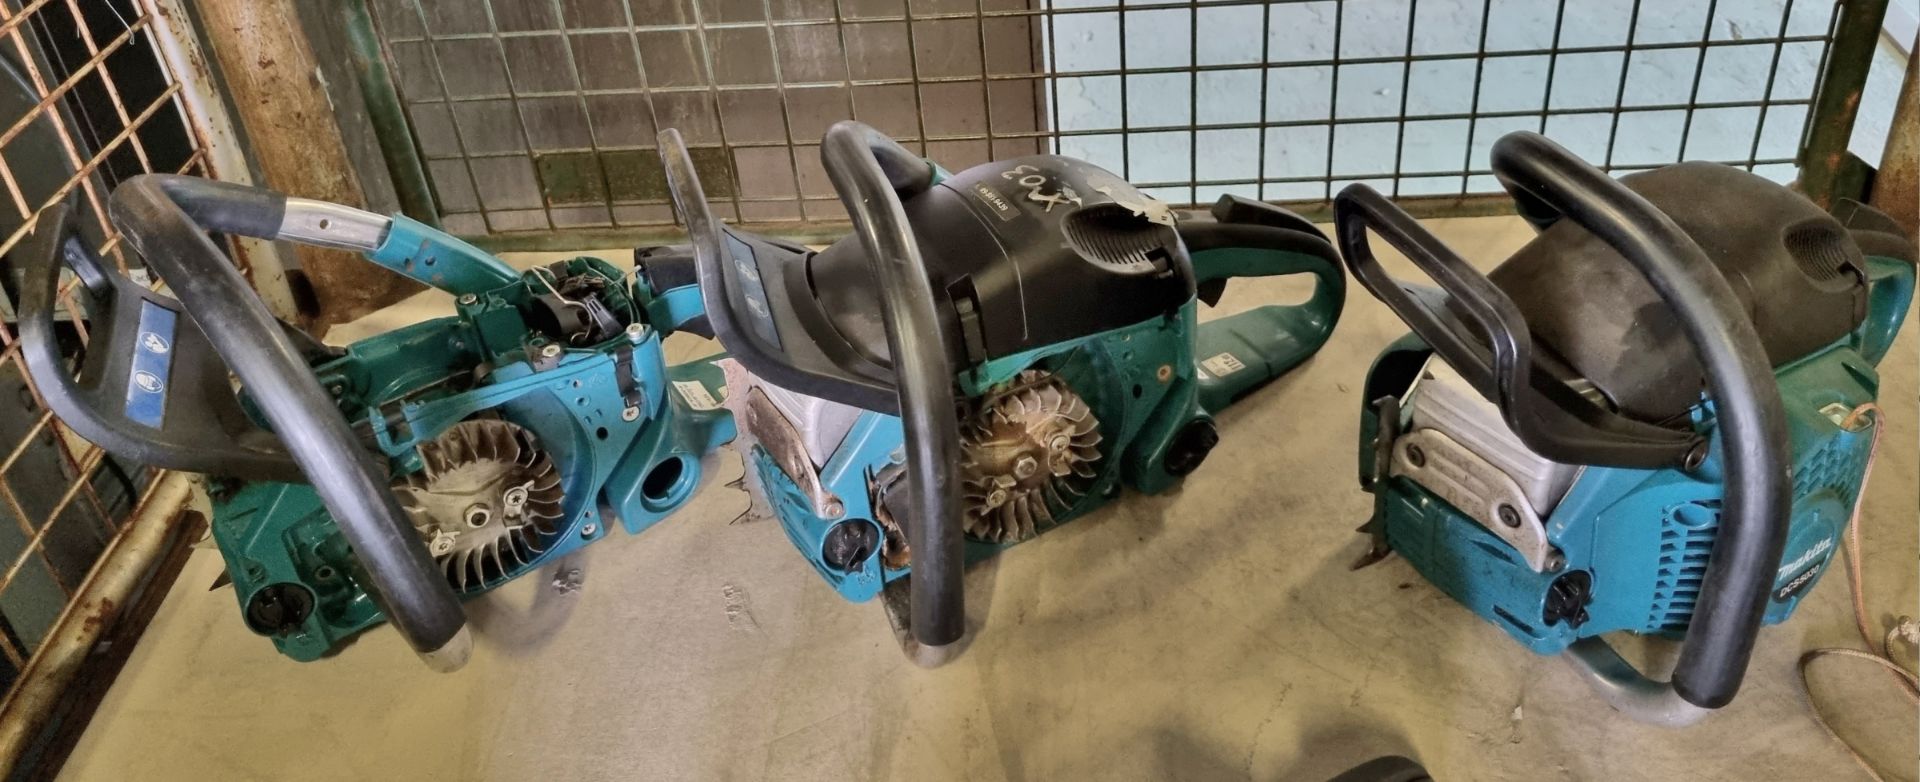 6x Makita DCS5030 50cc petrol chainsaws - AS SPARES OR REPAIRS - Image 4 of 5